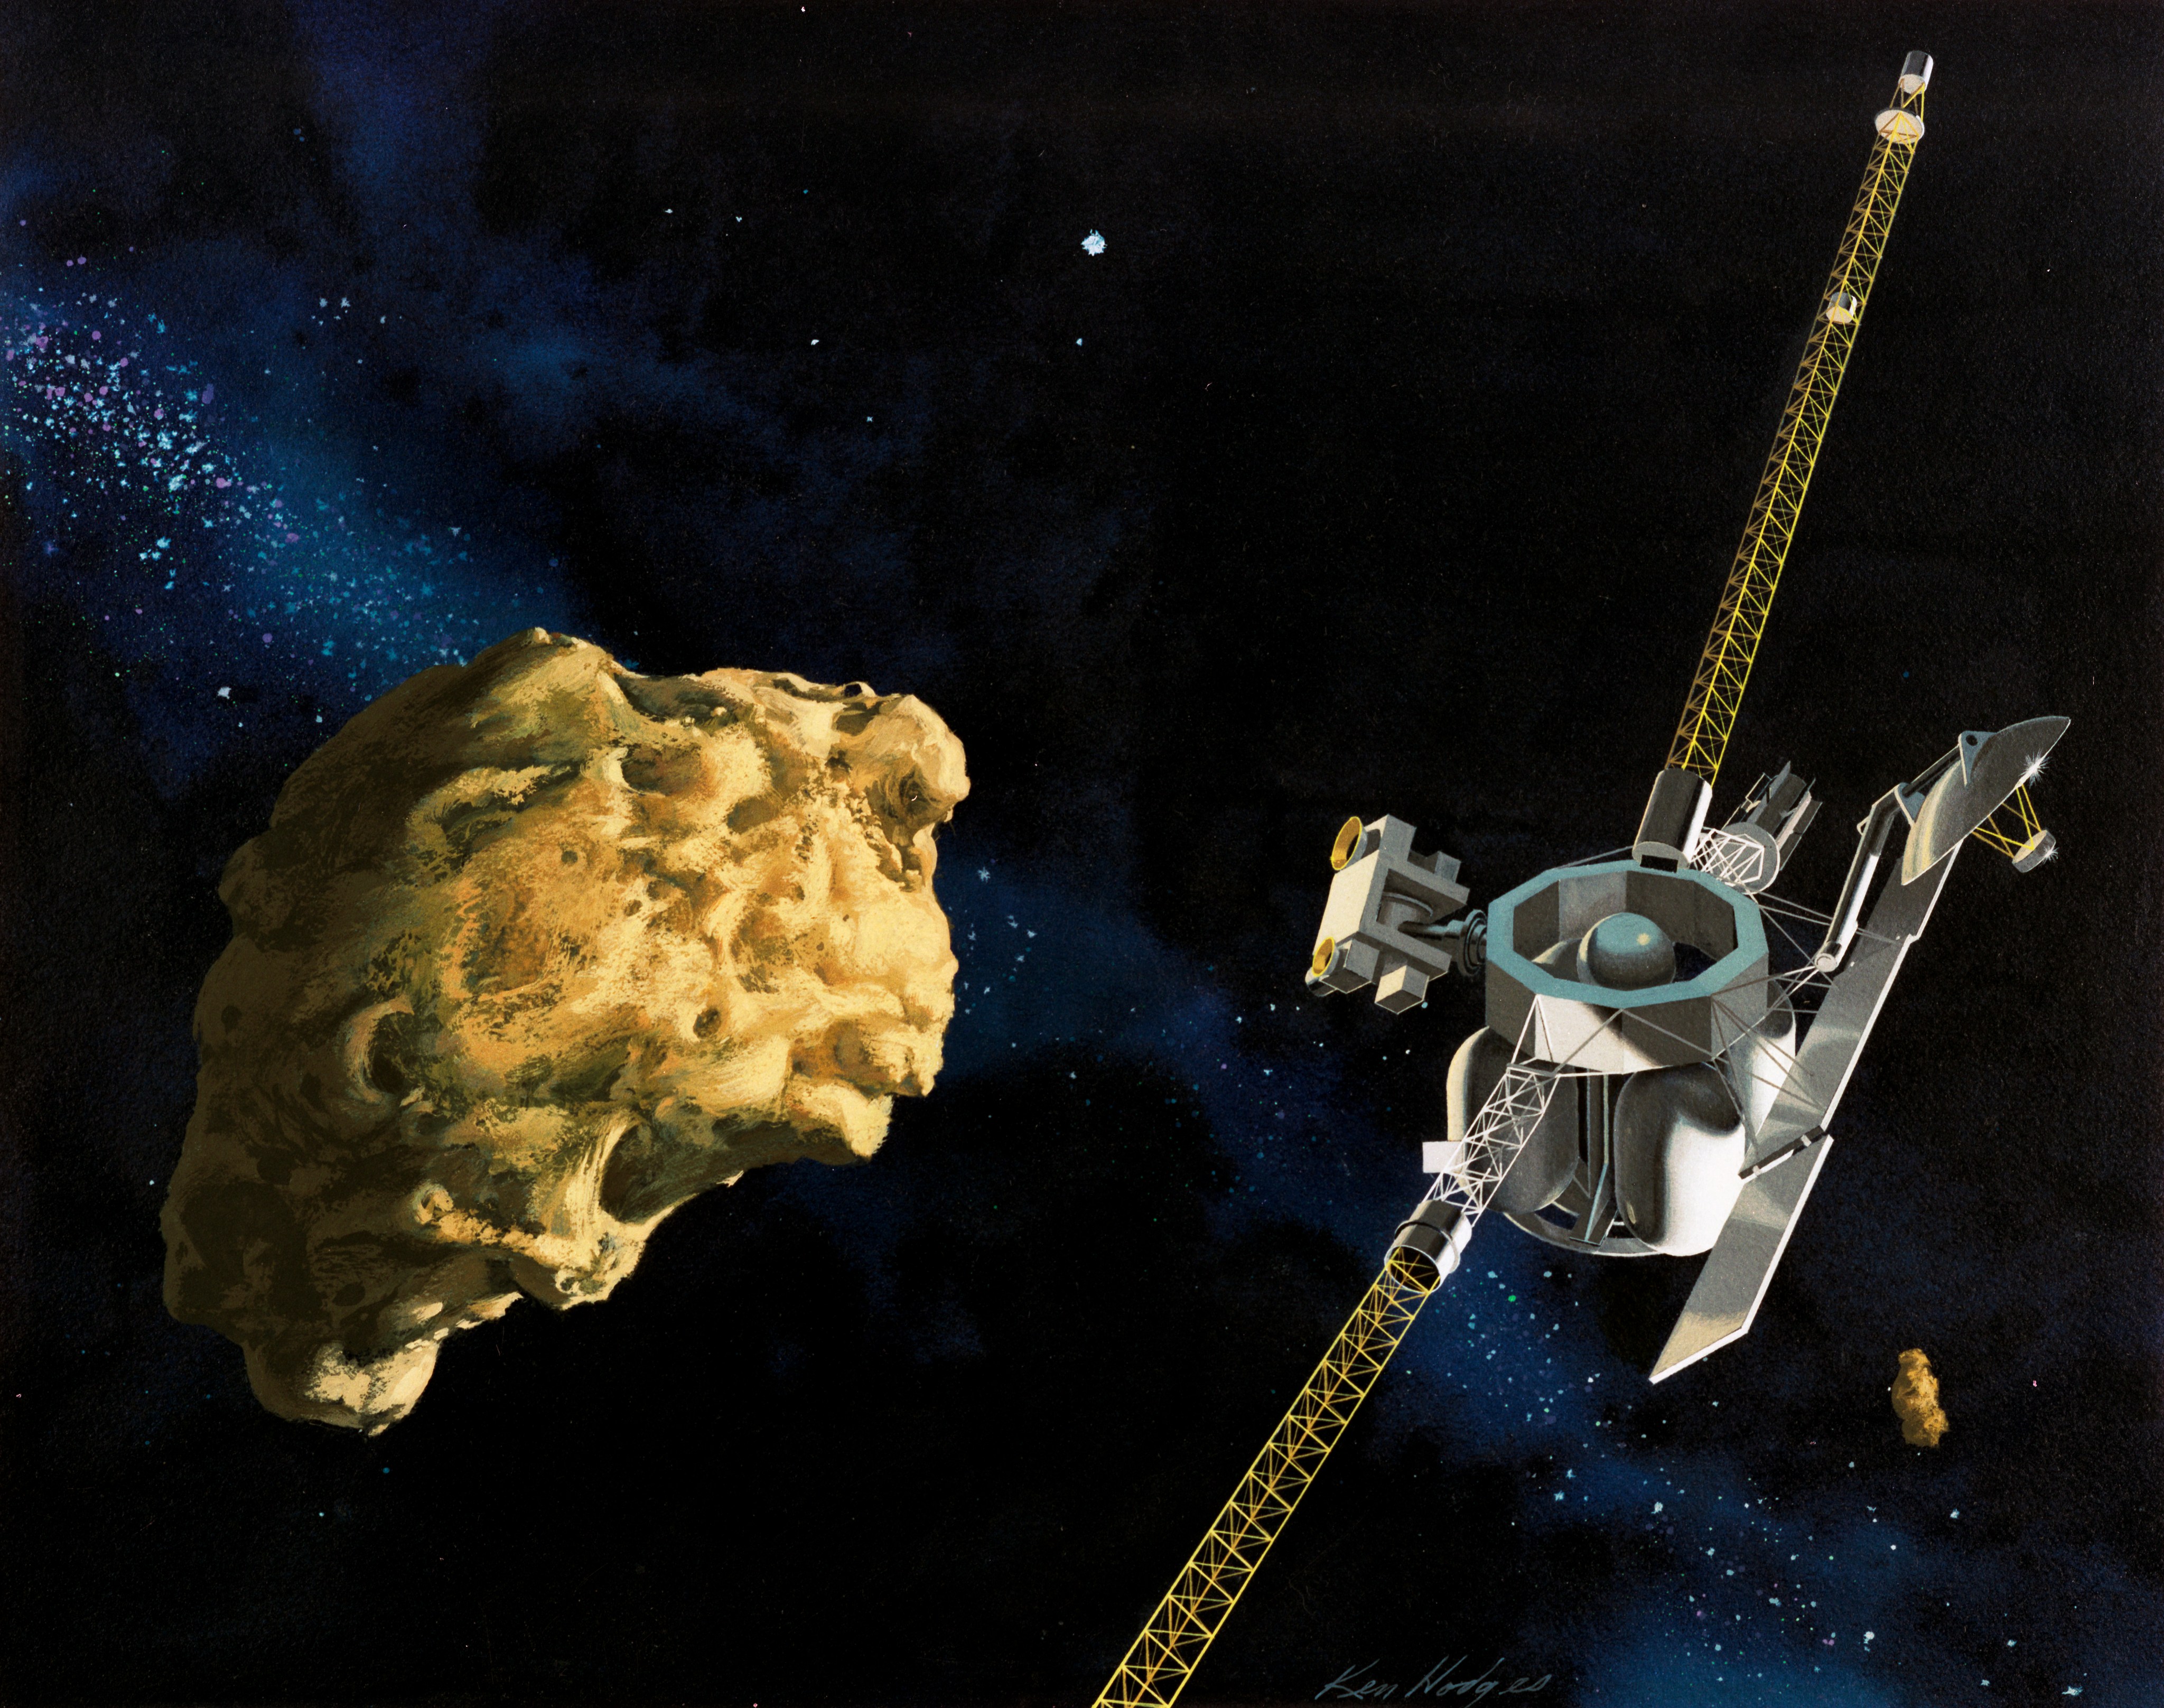 Painting of spacecraft flying close to a comet.